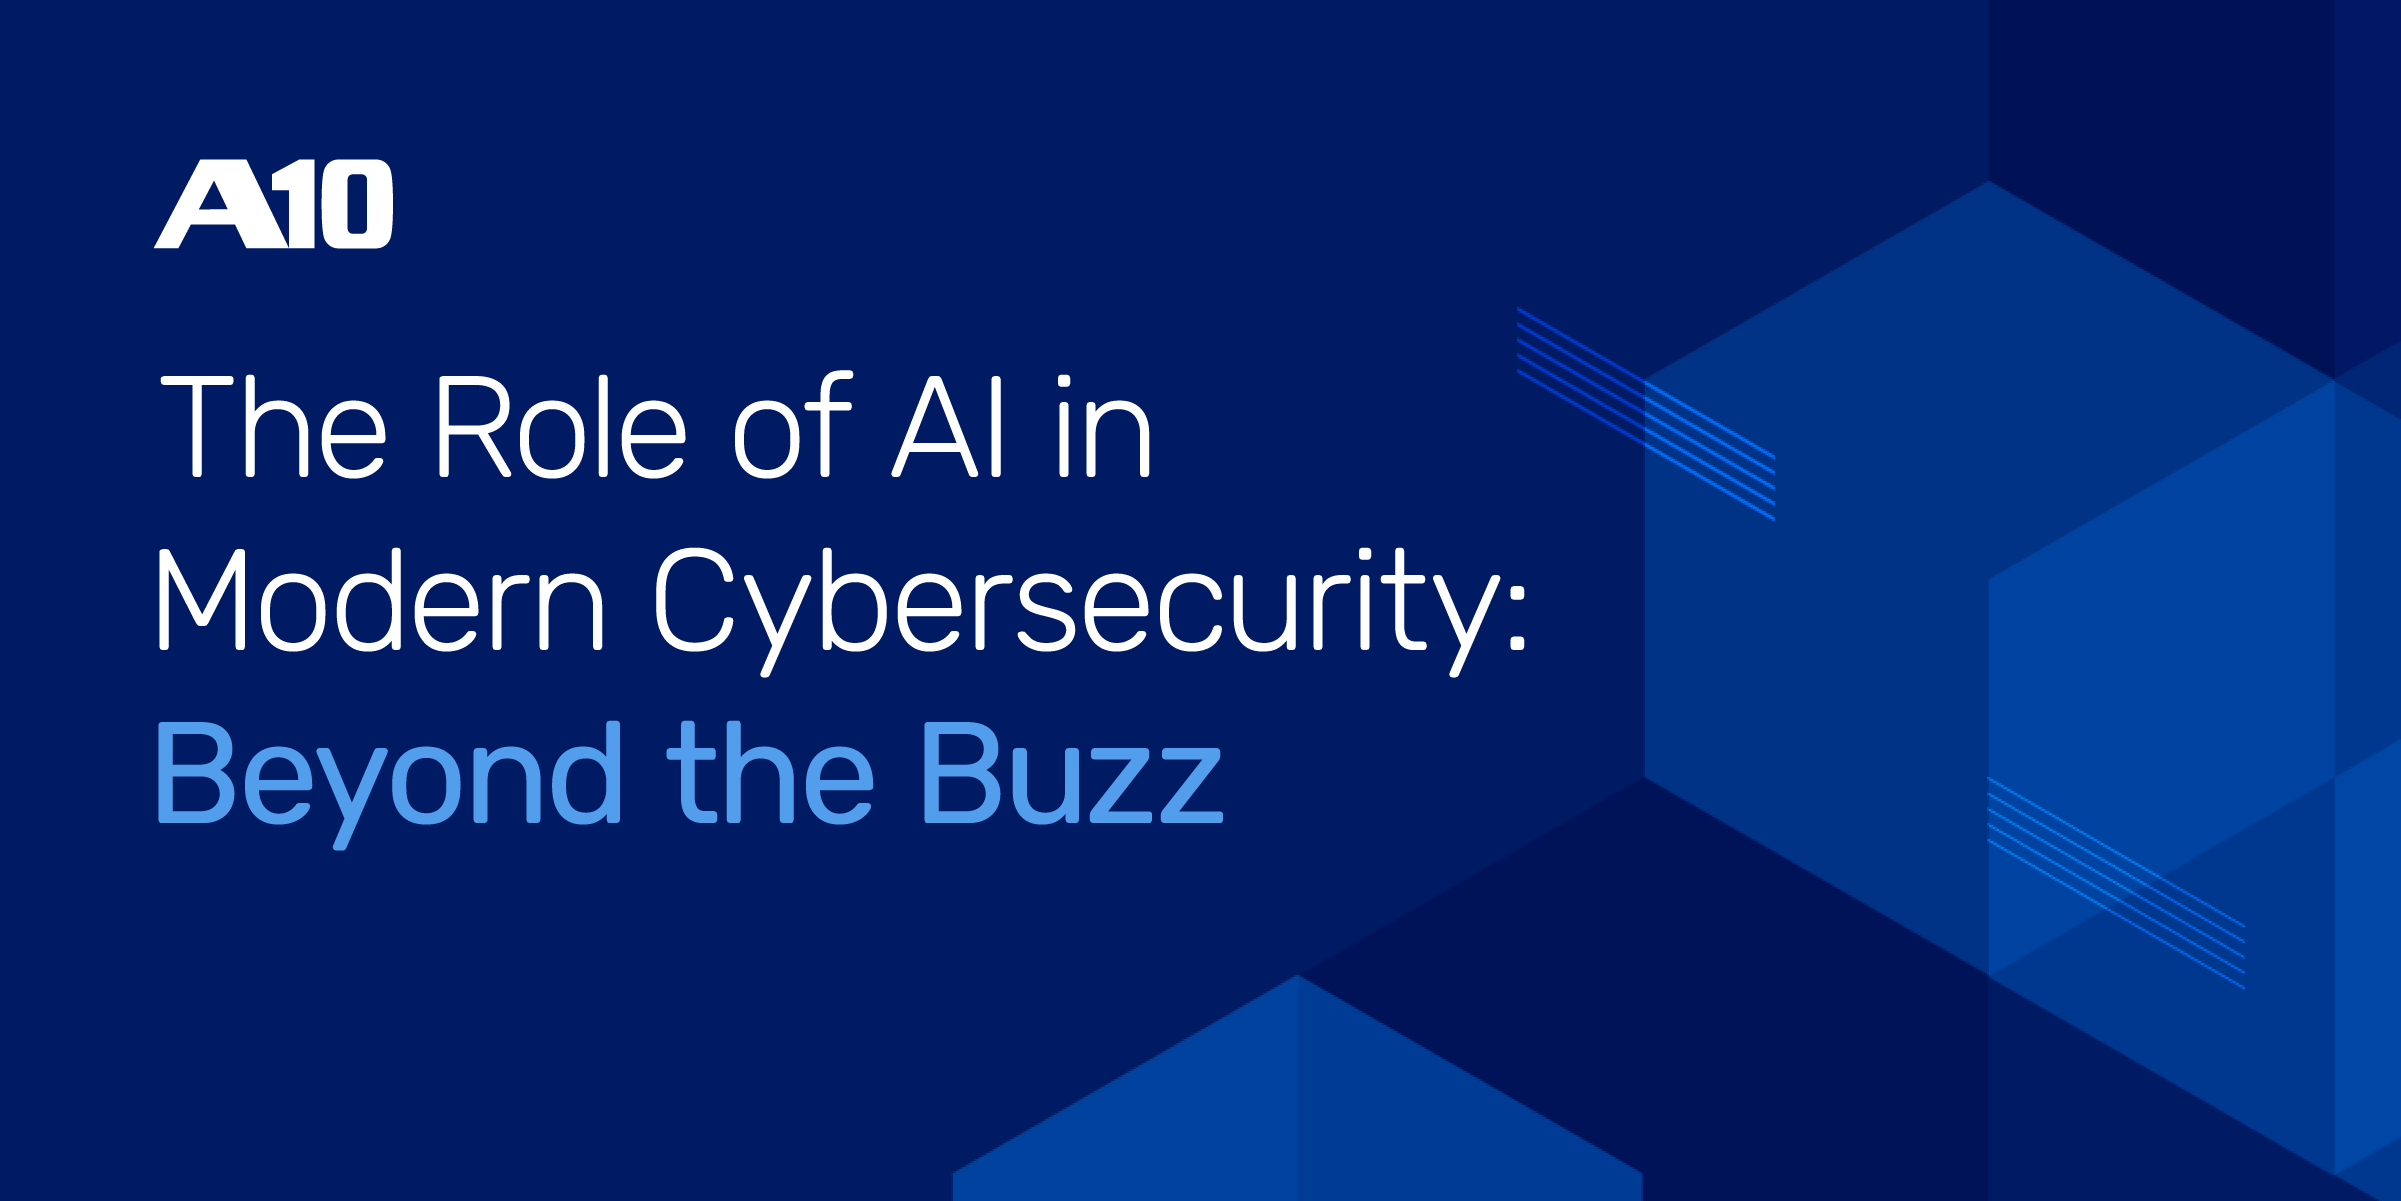 The Role of AI in Modern Cybersecurity: Beyond the Buzz